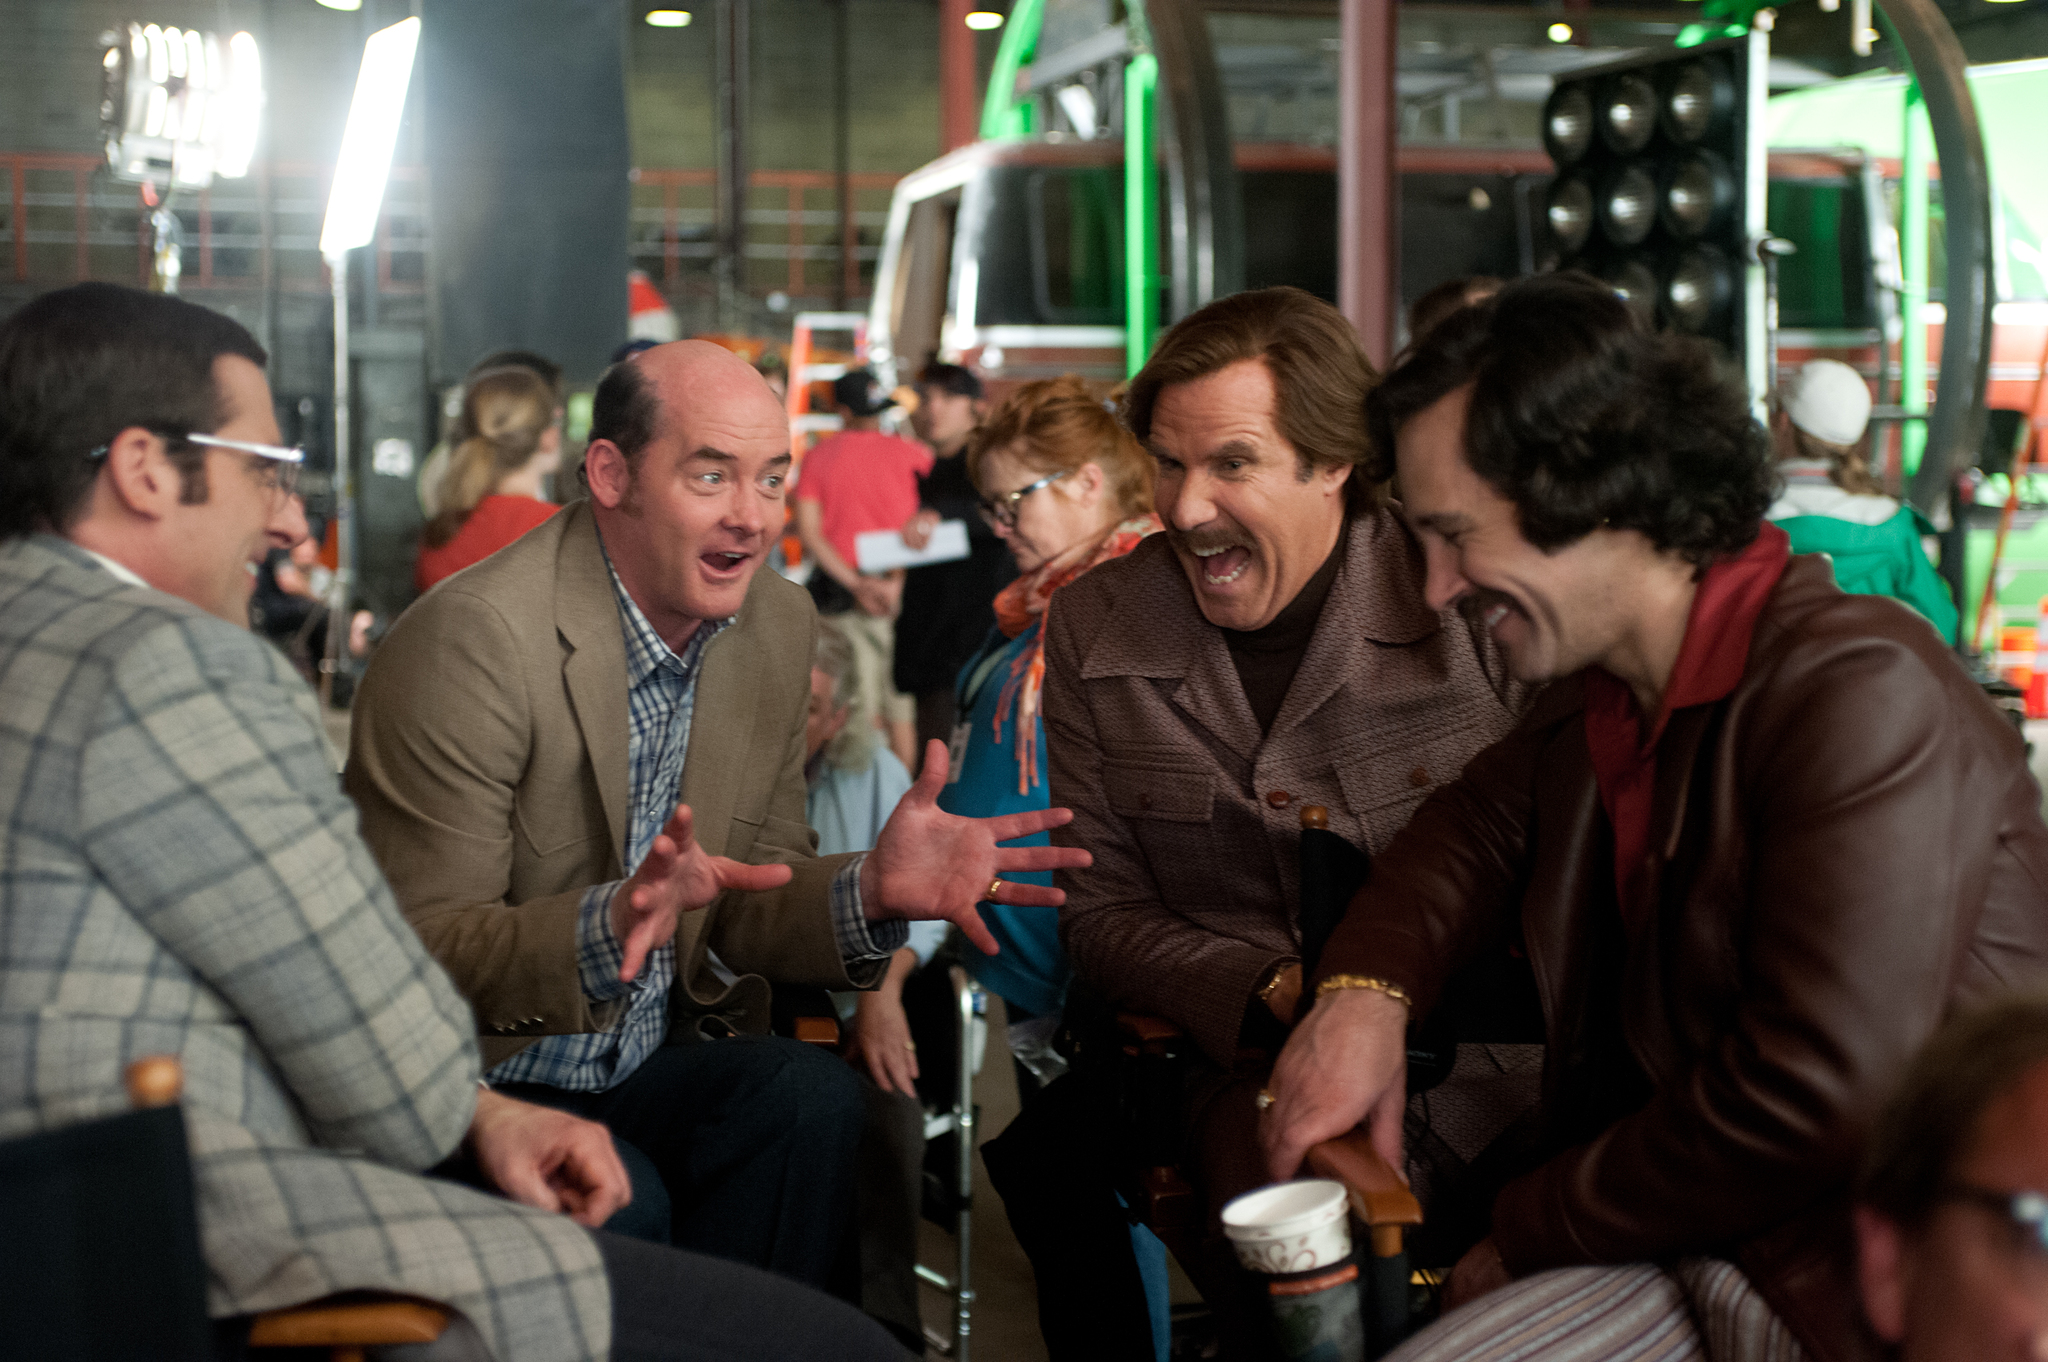 Still of Will Ferrell, Steve Carell, David Koechner and Paul Rudd in Anchorman 2: The Legend Continues (2013)